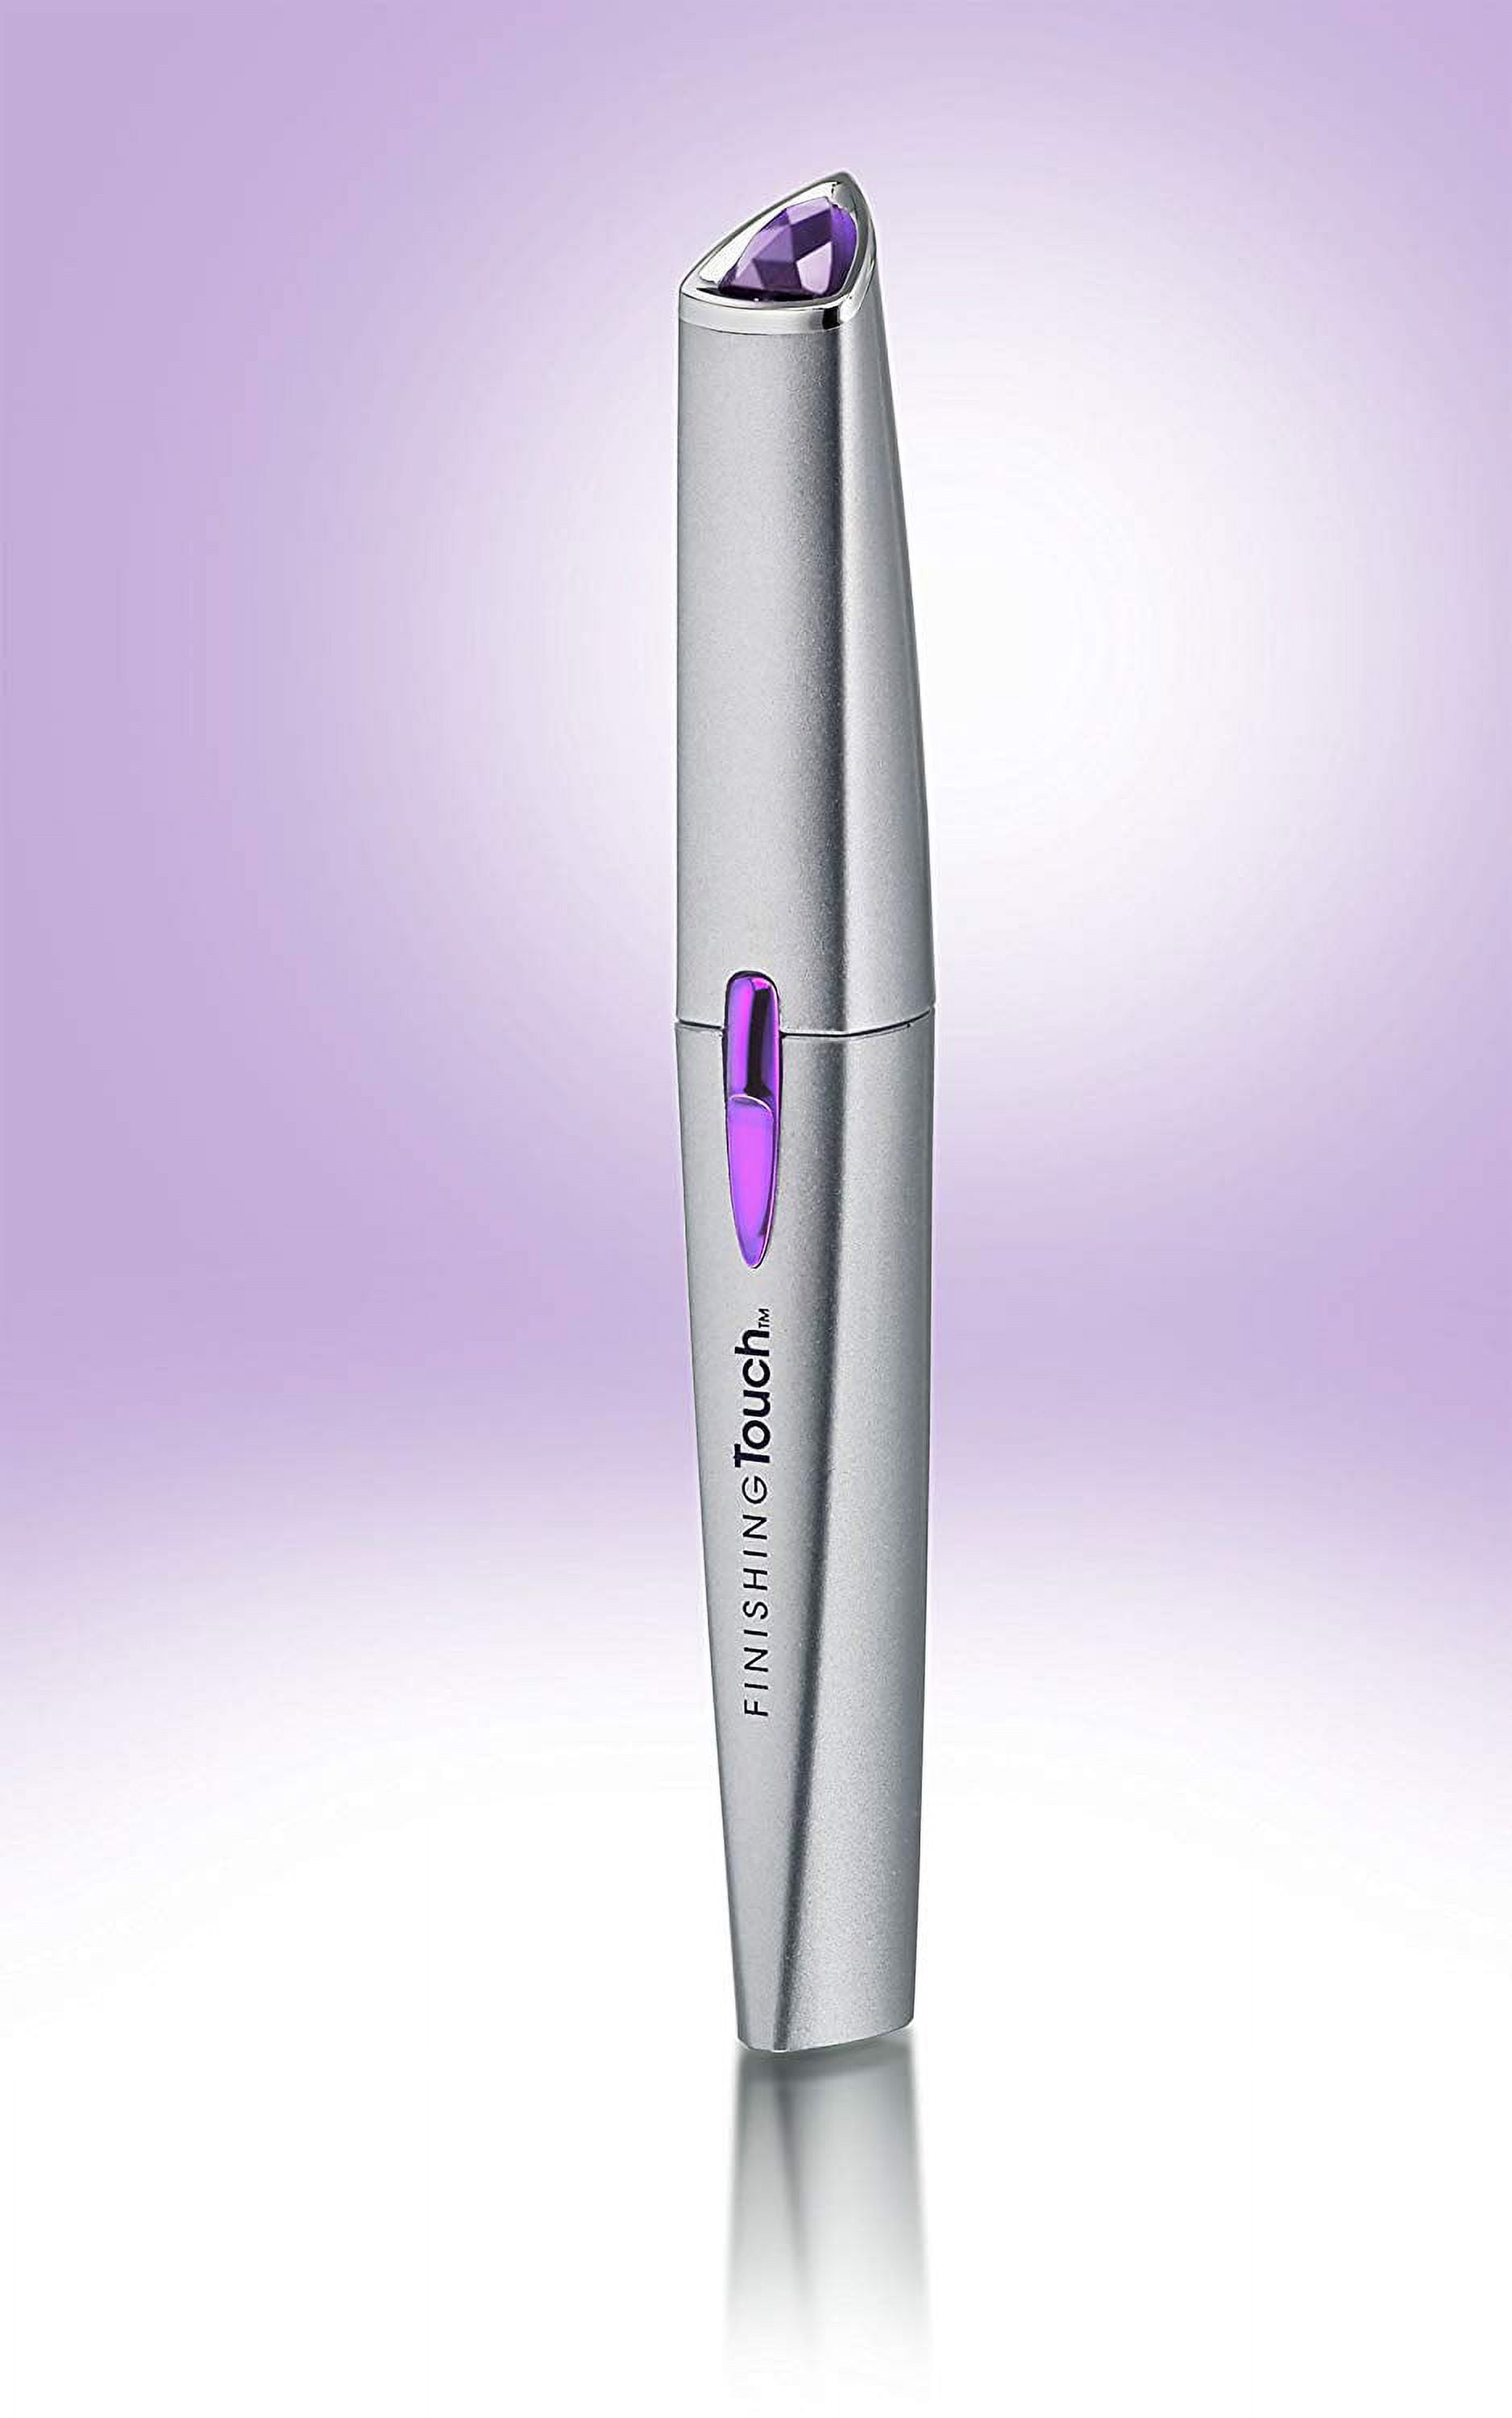 Finishing Touch Lumina Personal Hair Remover, As Seen on TV